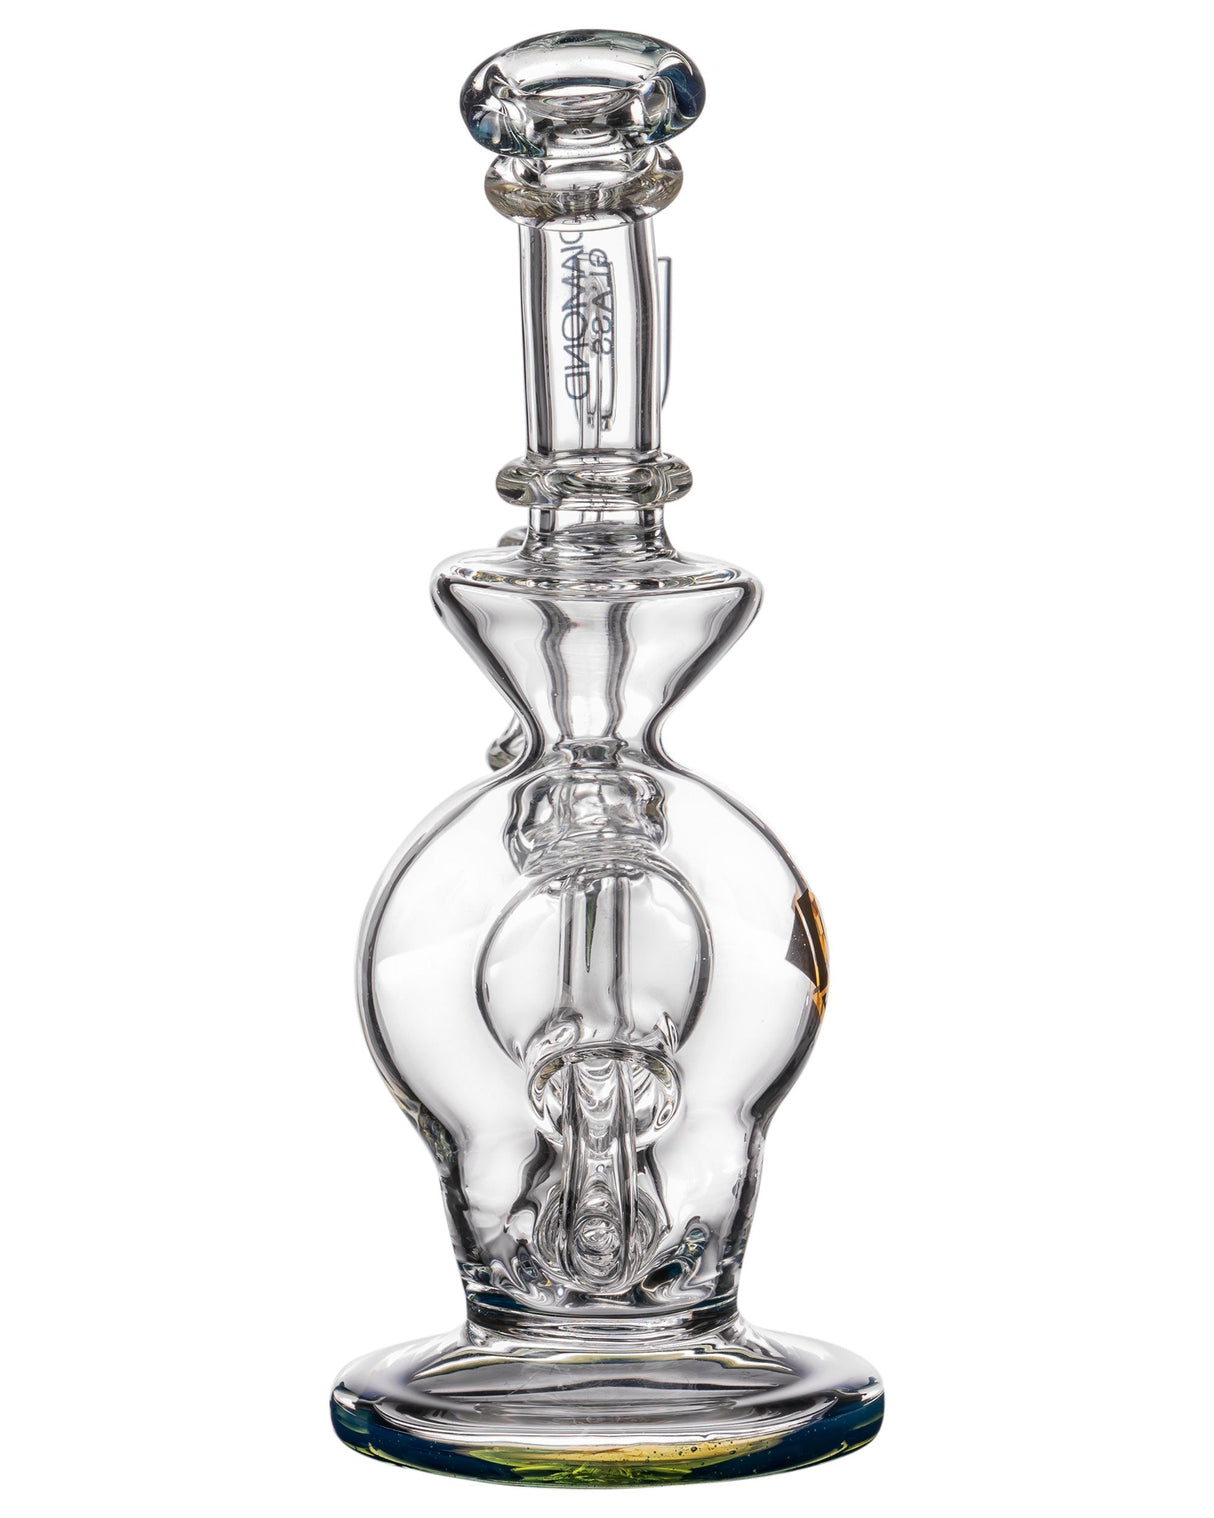 Diamond Glass Rigception Incycler with blue accents and showerhead perc, front view on white background